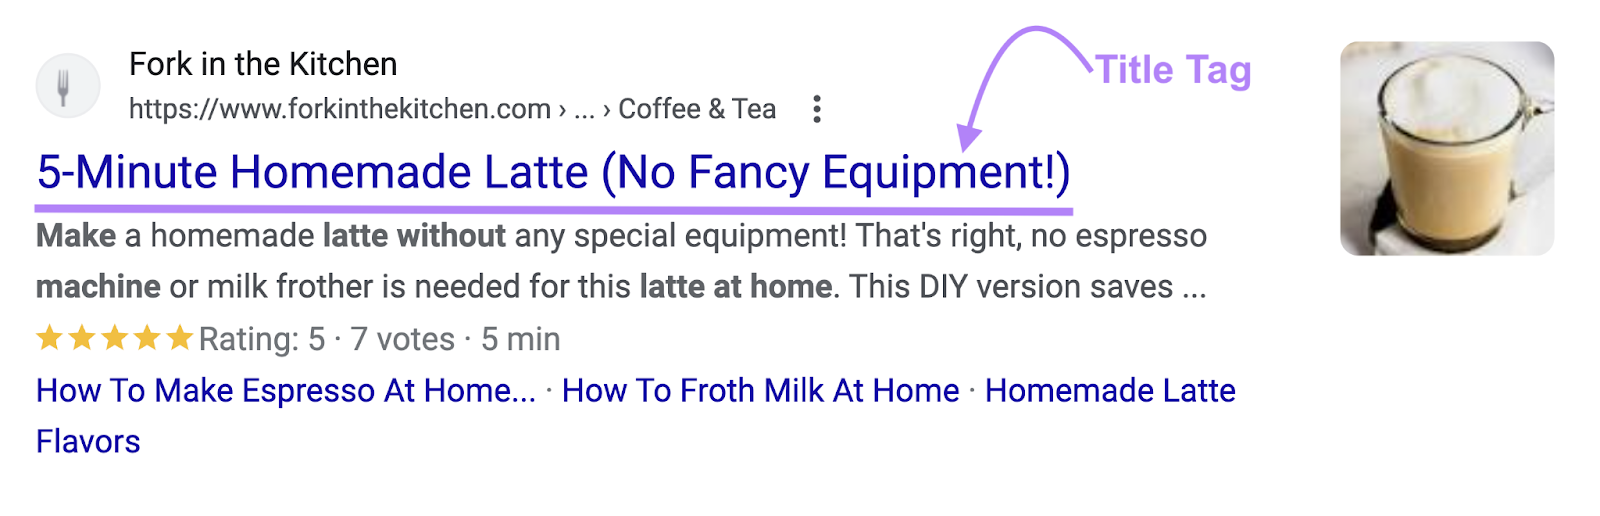 Title tag connected  the SERP that reads "5-Minute Homemade Latte (No Fancy Equipment)"